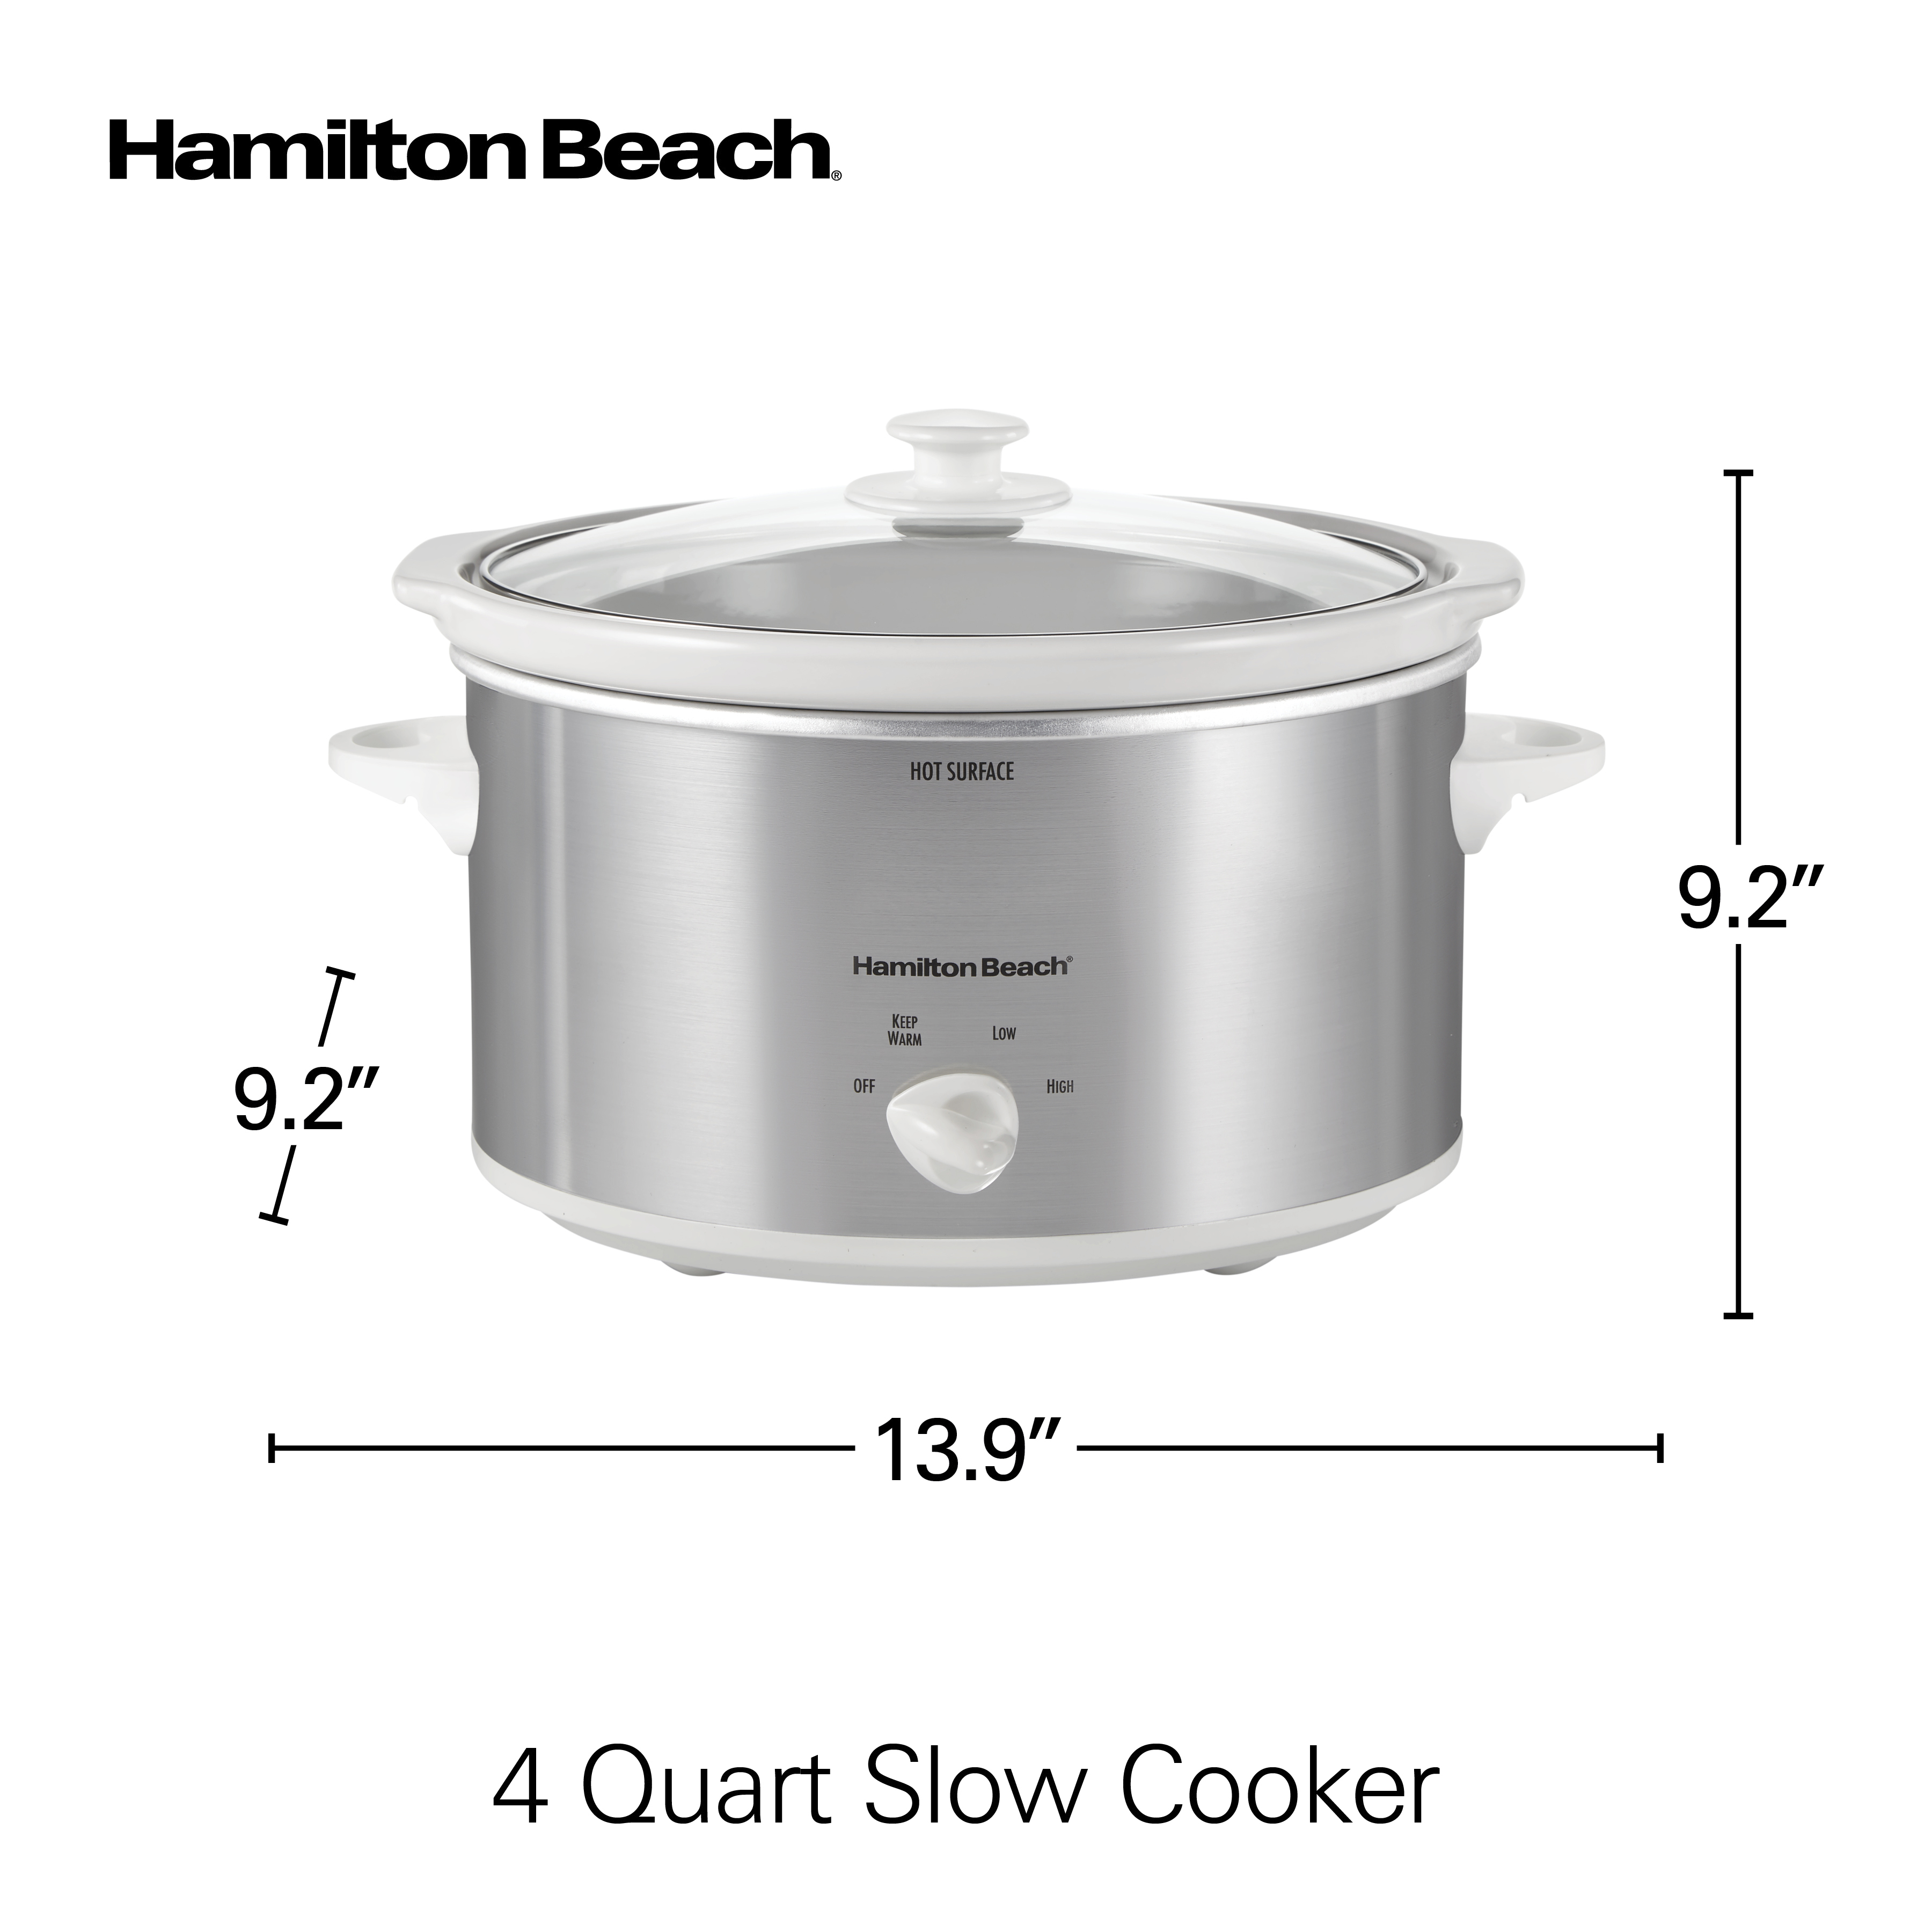 Hamilton Beach Slow Cooker, 4 Quart Capacity, Serves 4+ People, Removable Crock, White and Silver, 33140 - image 3 of 8